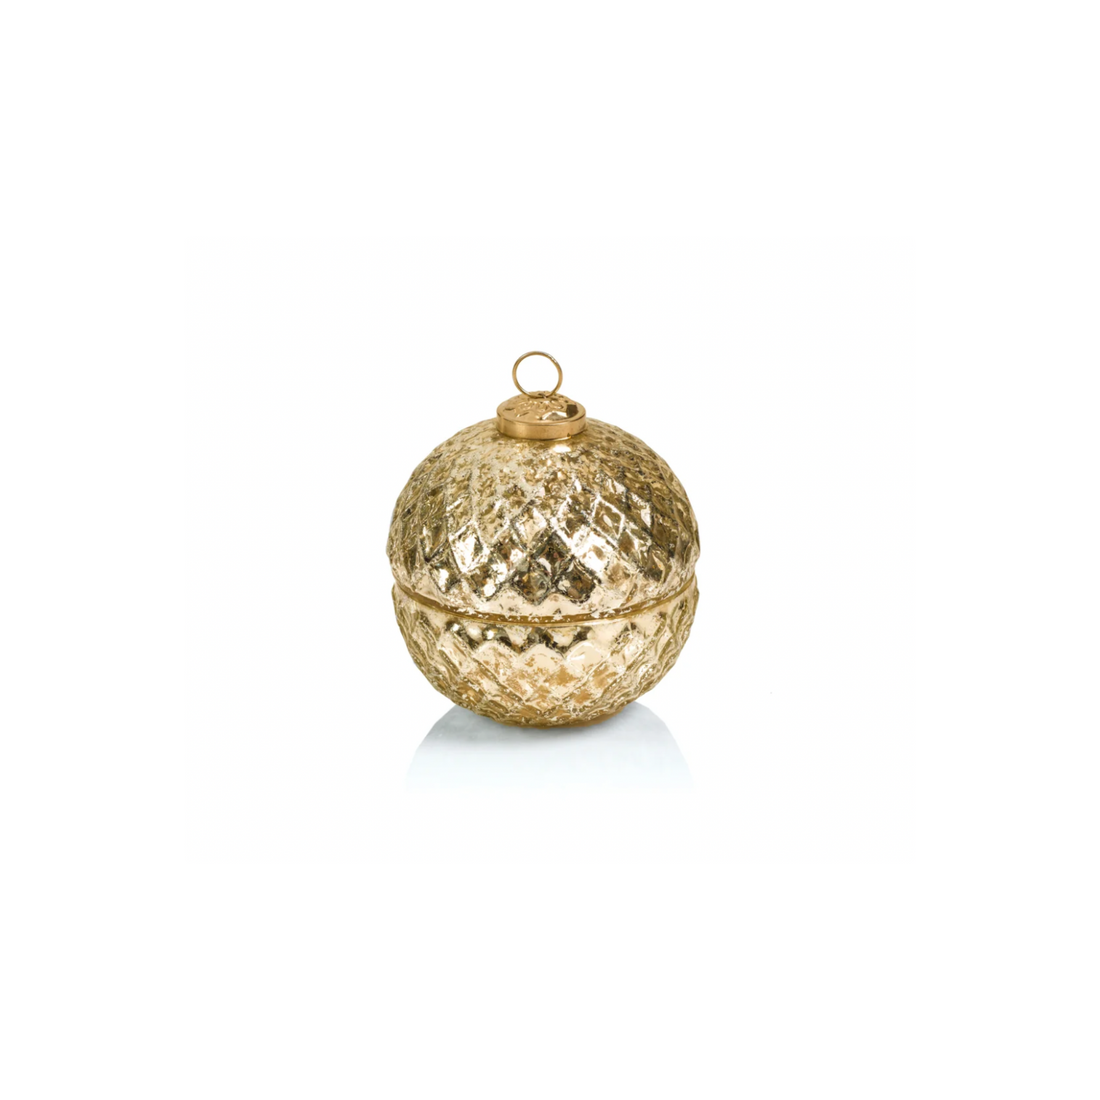 Beehive Ornament Candle